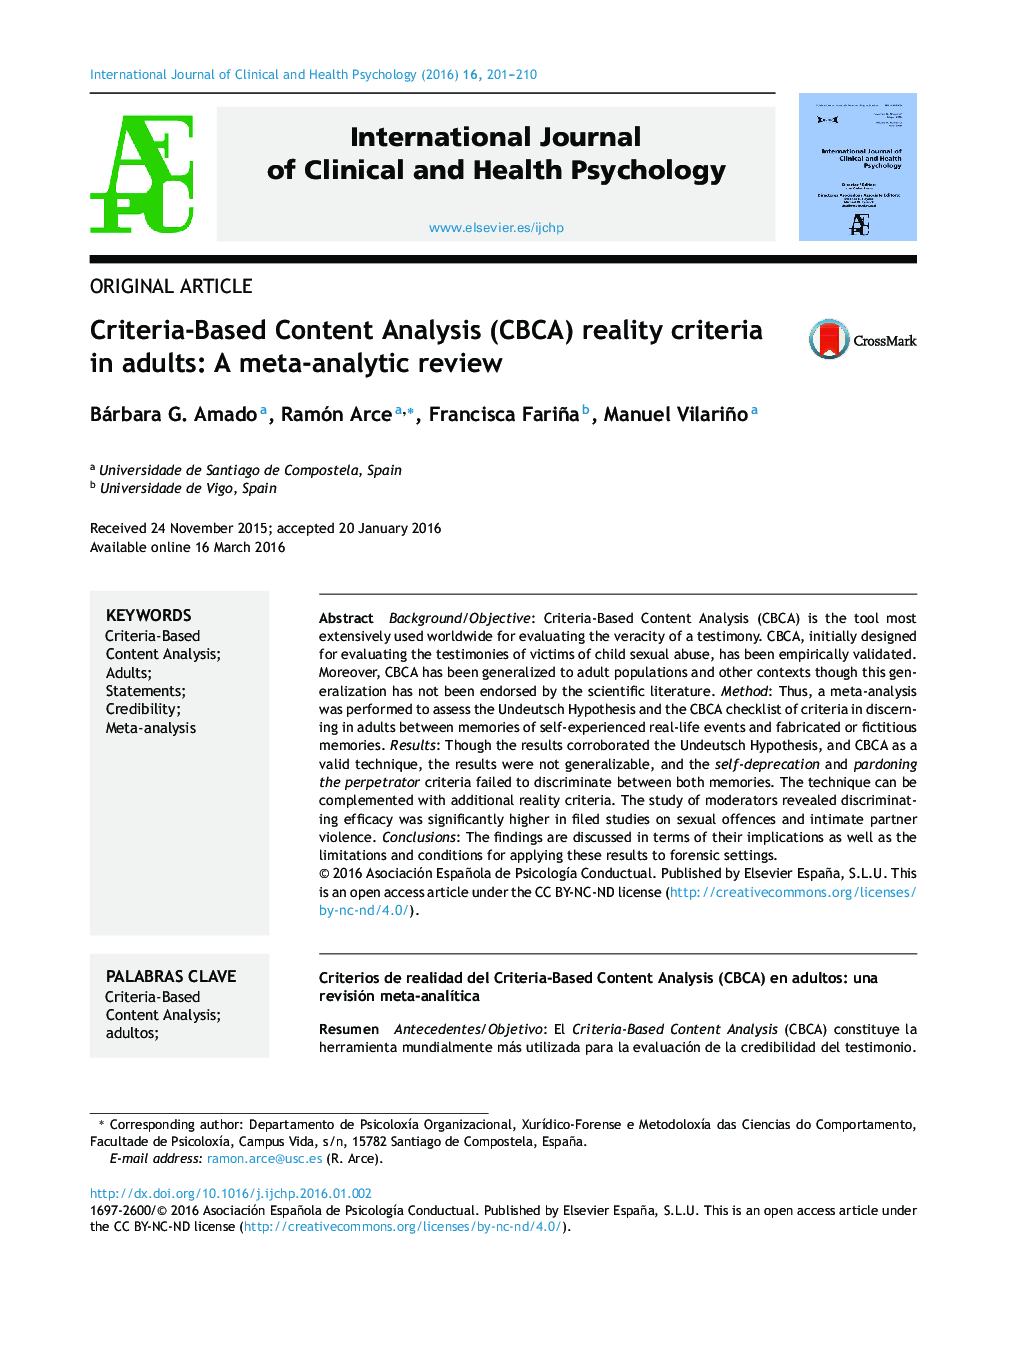 Criteria-Based Content Analysis (CBCA) reality criteria in adults: A meta-analytic review